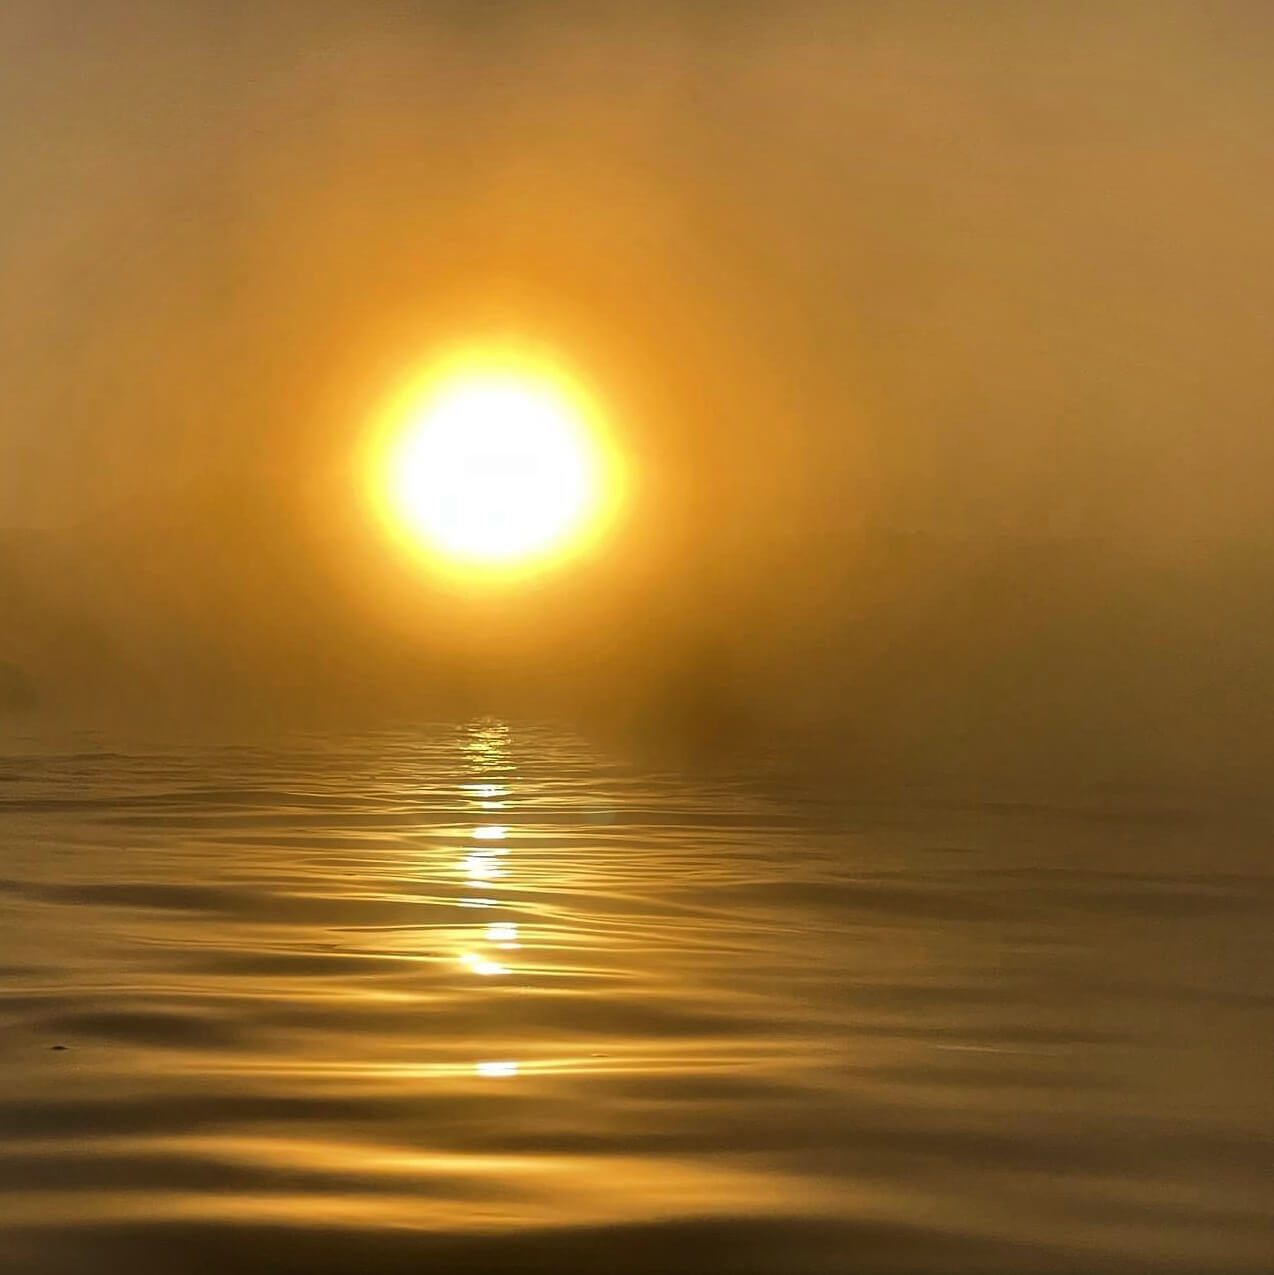 Hazy image of the sun above water